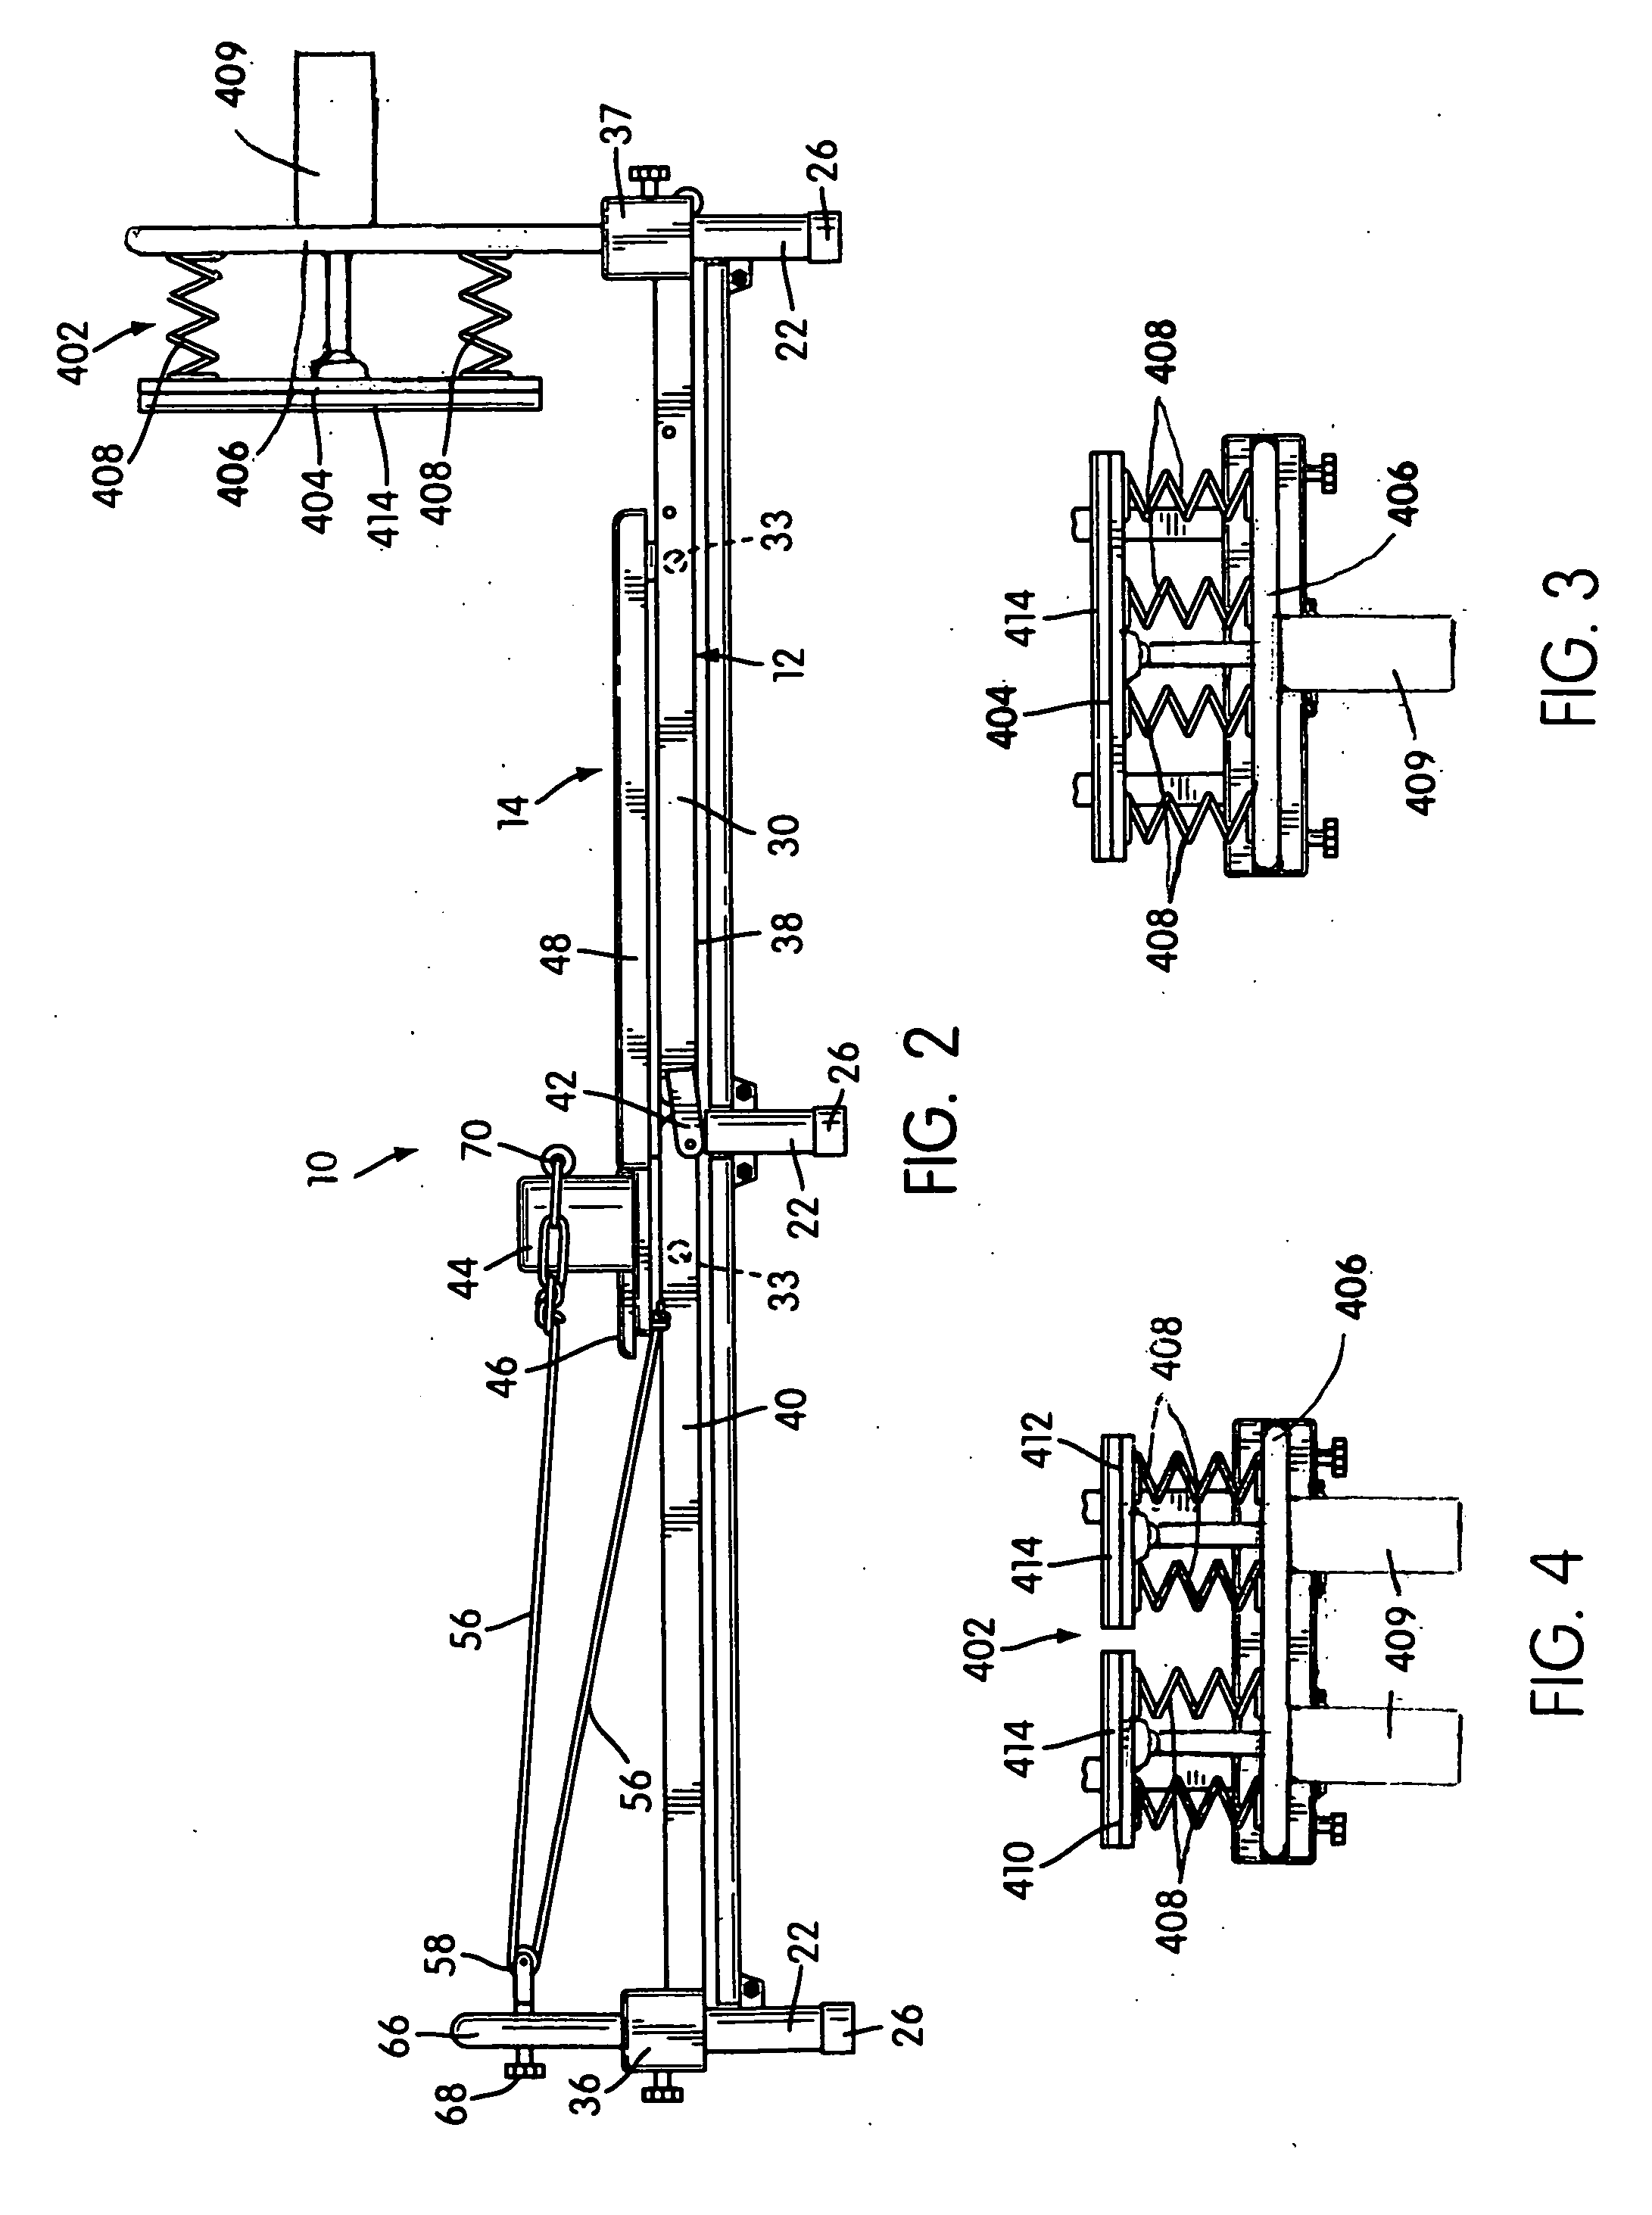 Exercise apparatus and method